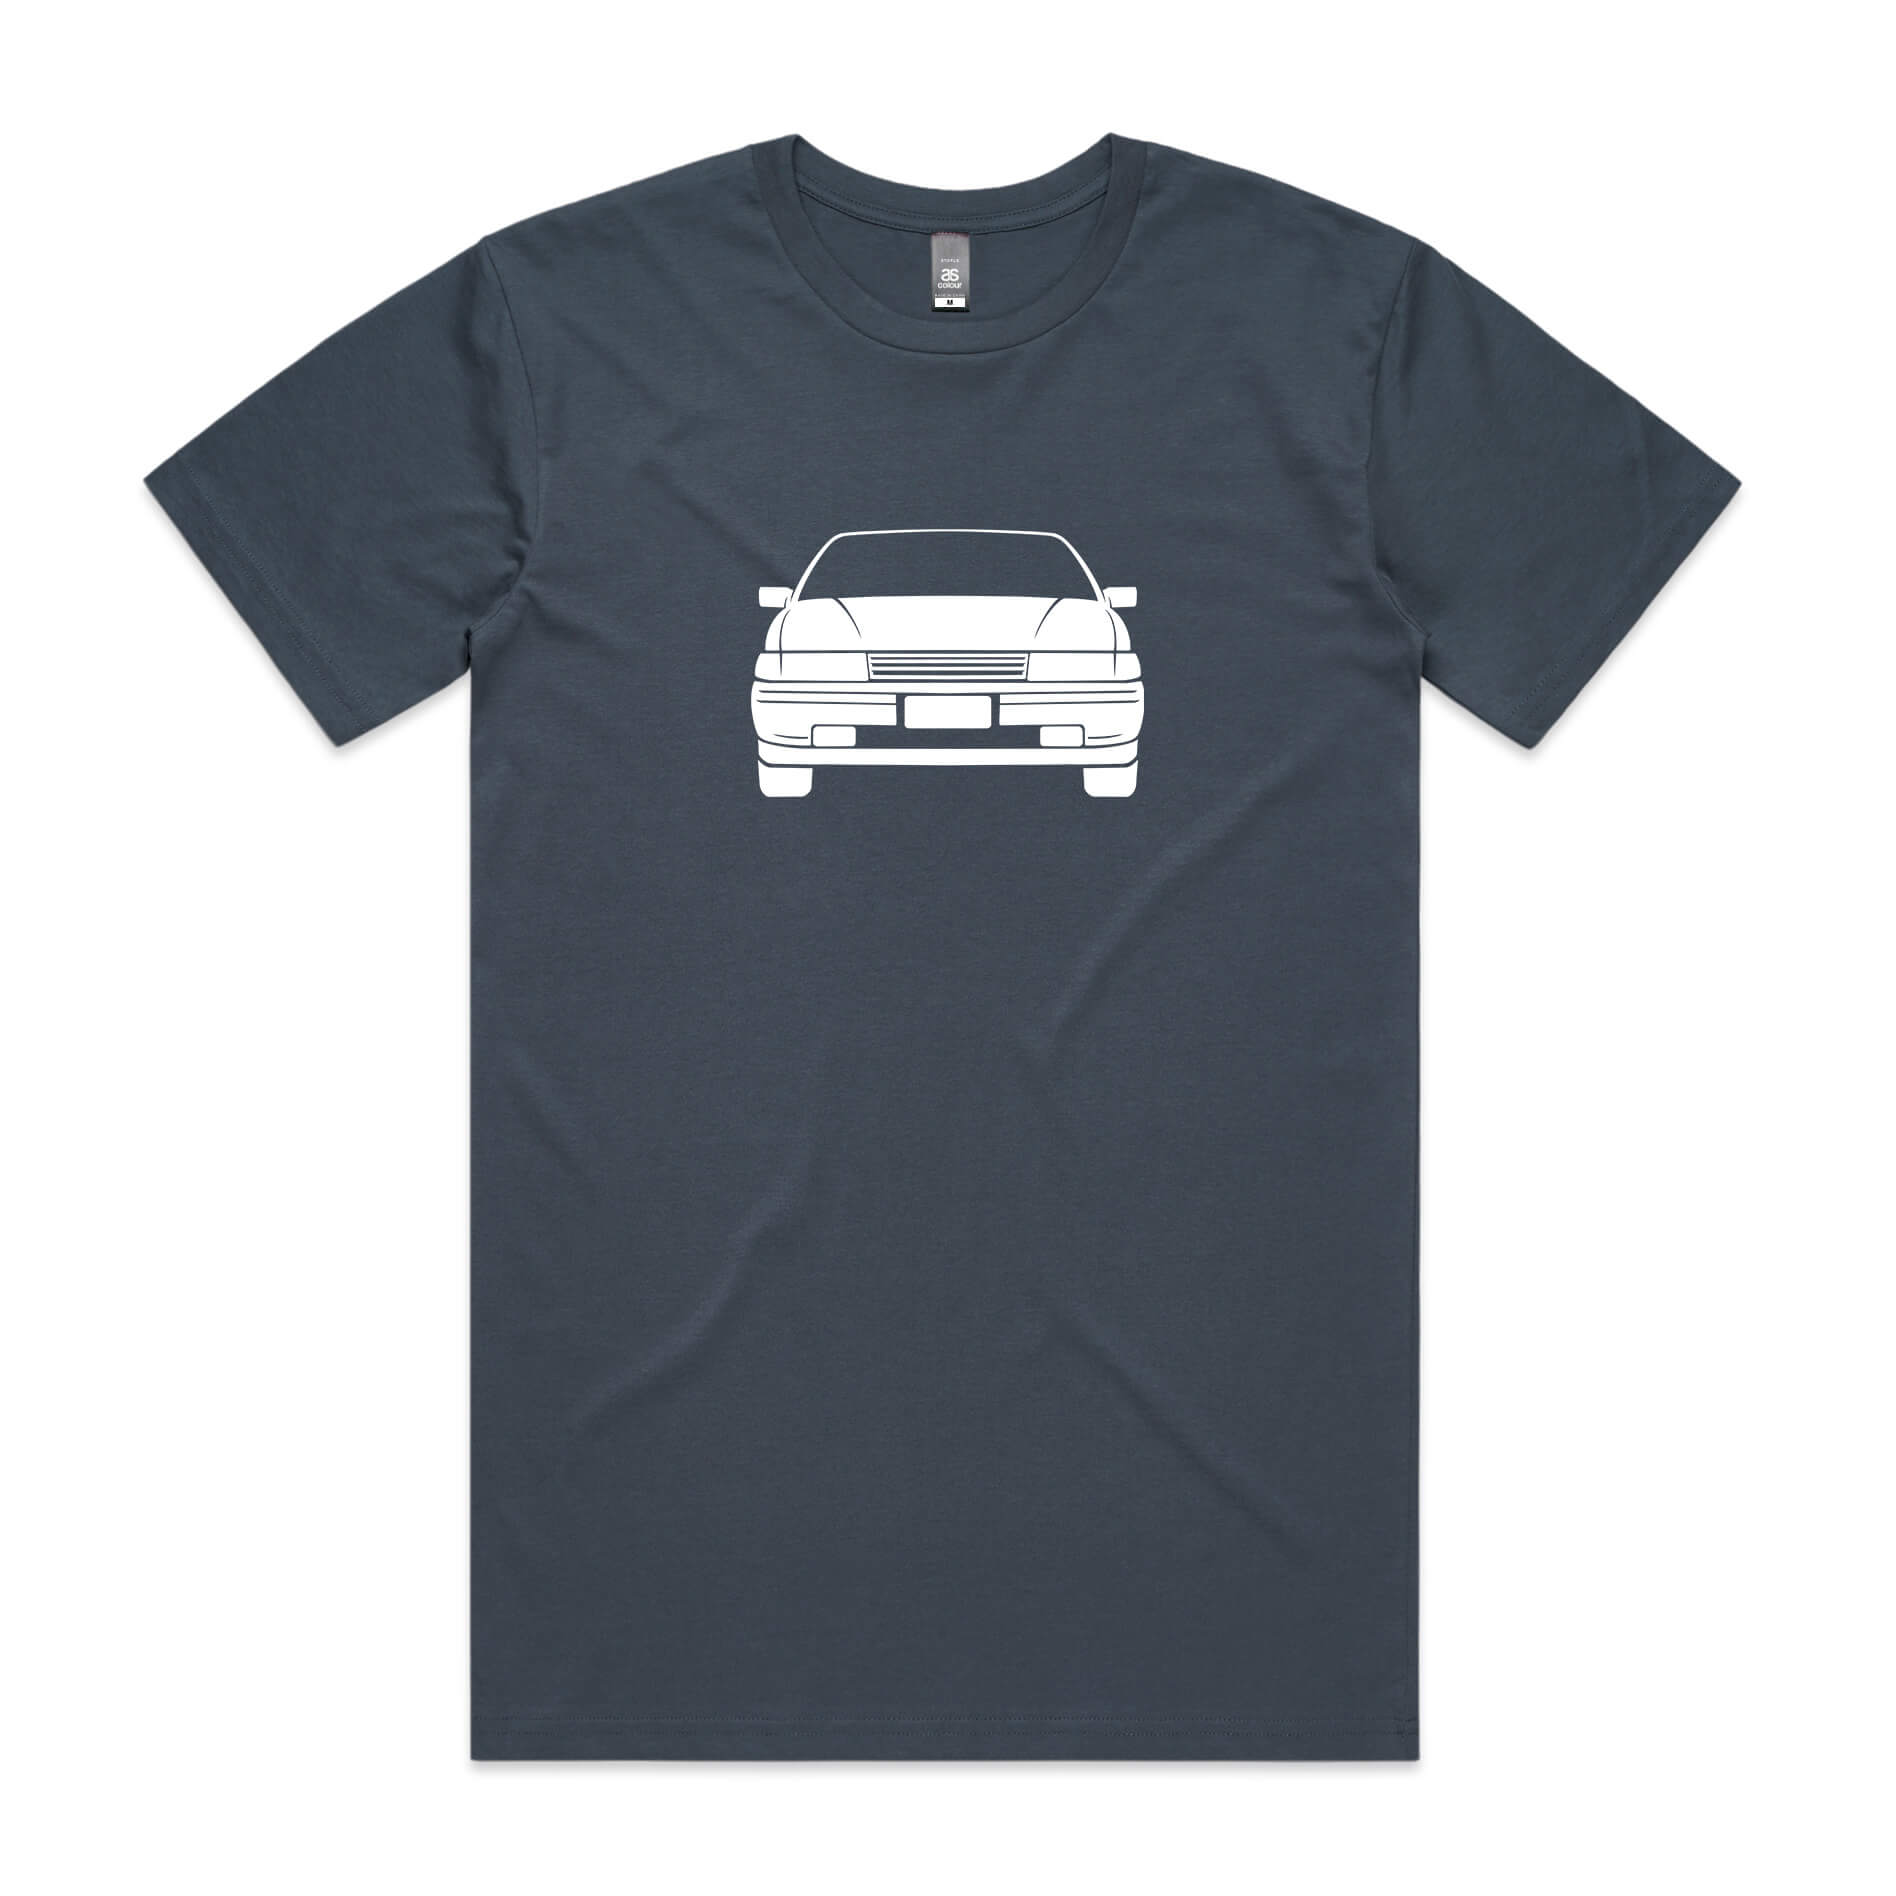 Holden VN Commodore t-shirt in petrol blue